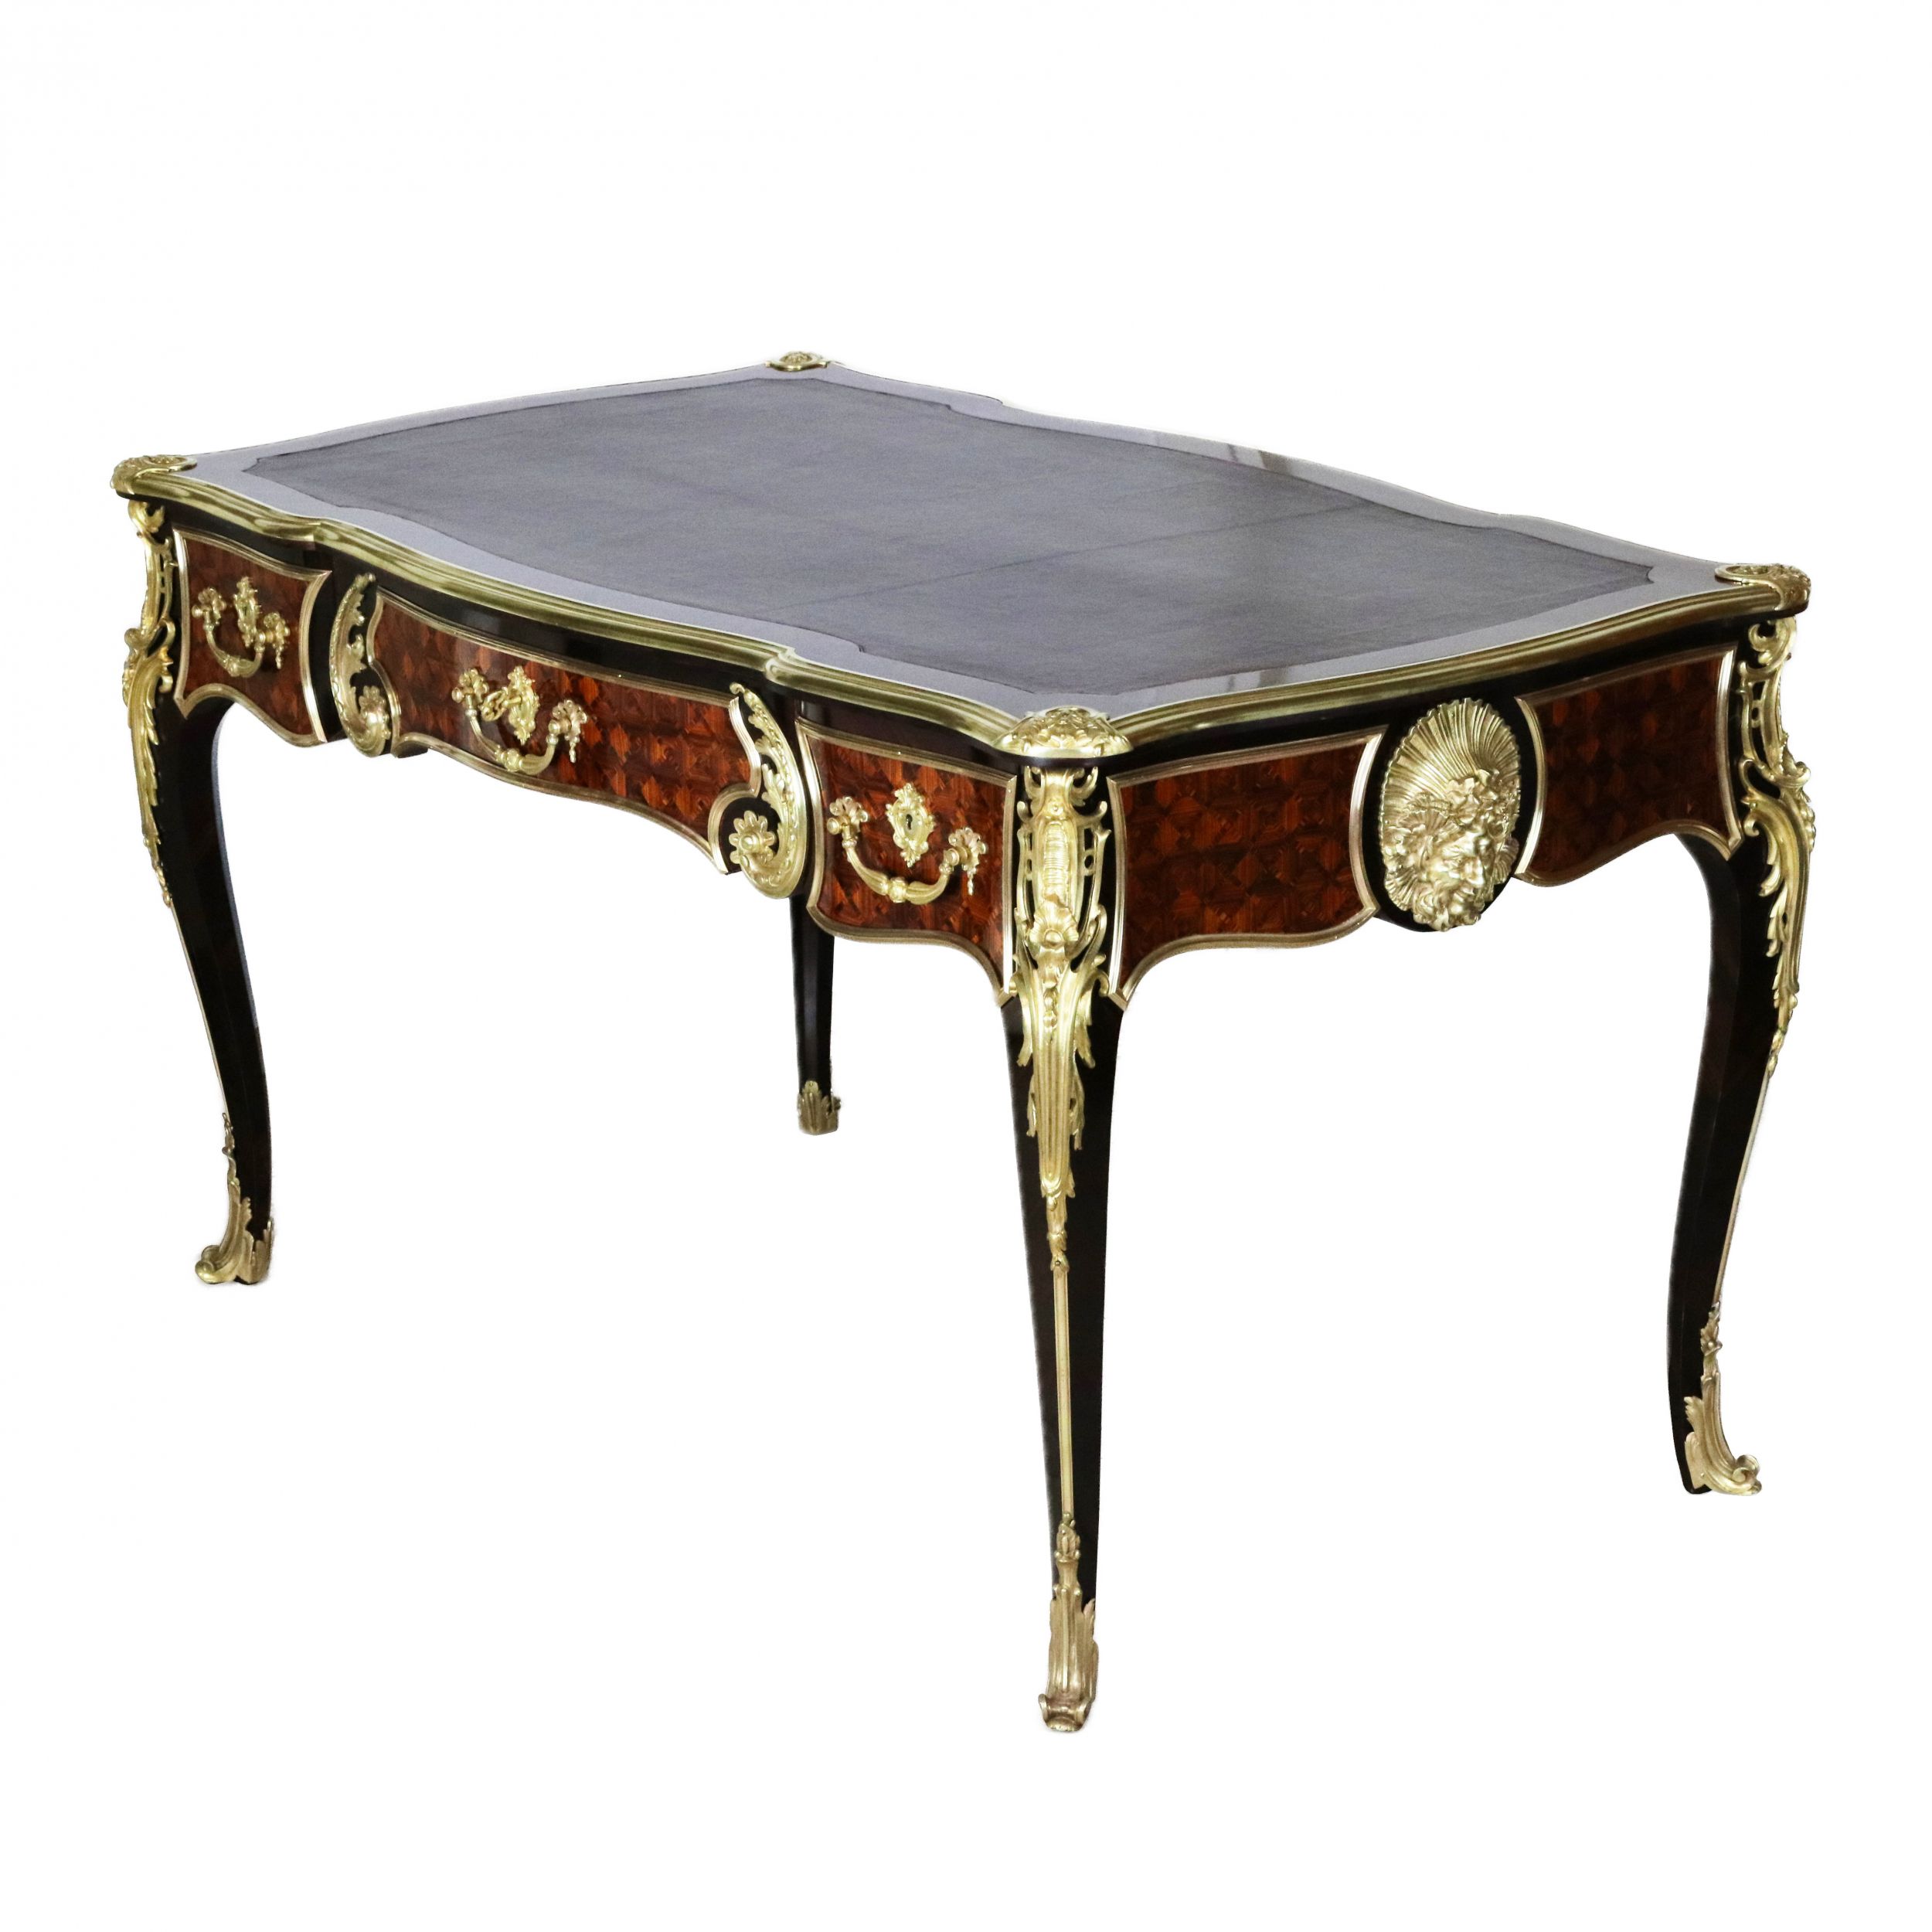 Magnificent-writing-desk-in-wood-and-gilded-bronze-Louis-XV-style-